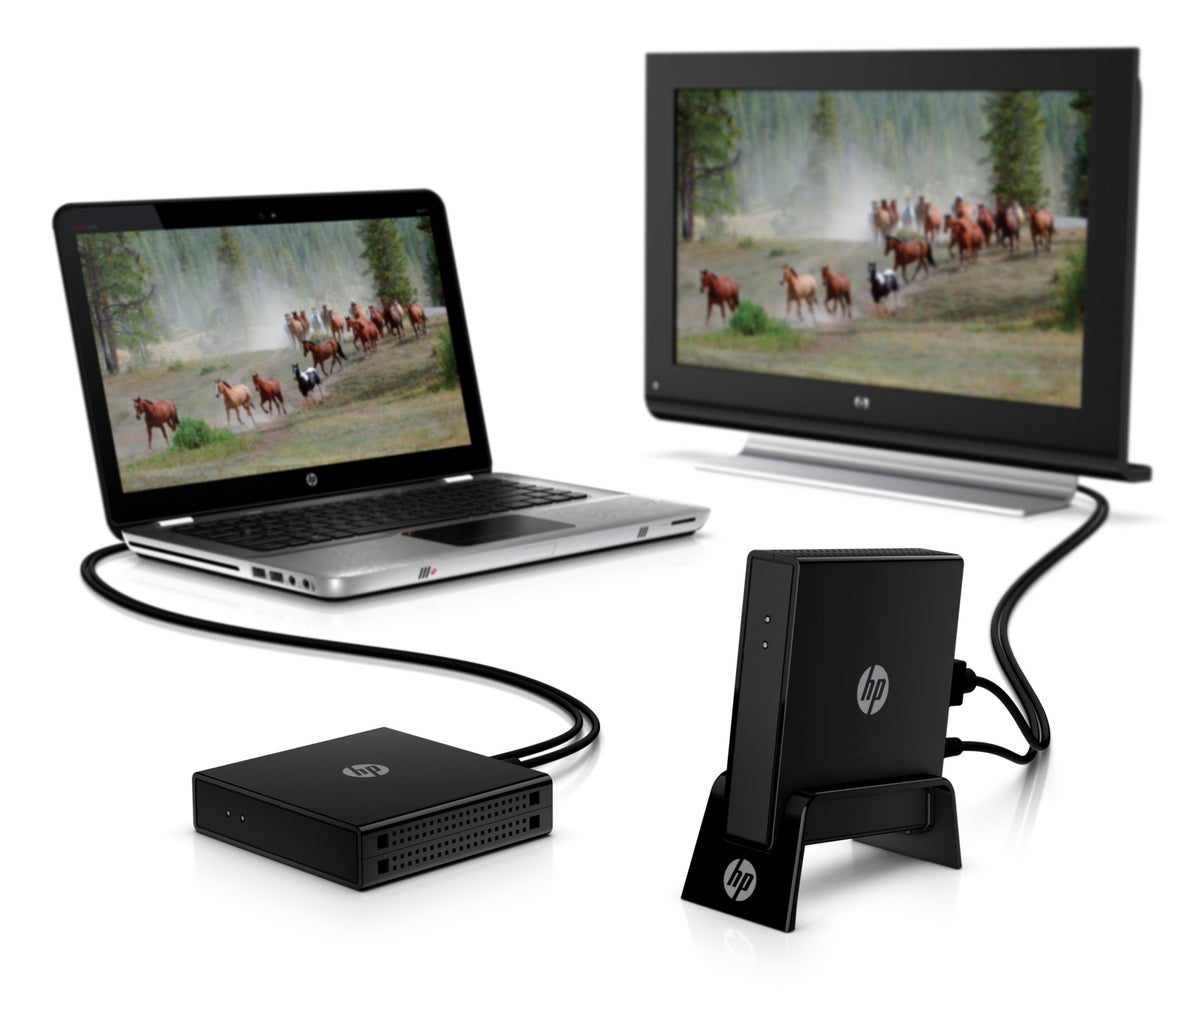 HP_Wireless_TV_Connect,_group_1.JPG